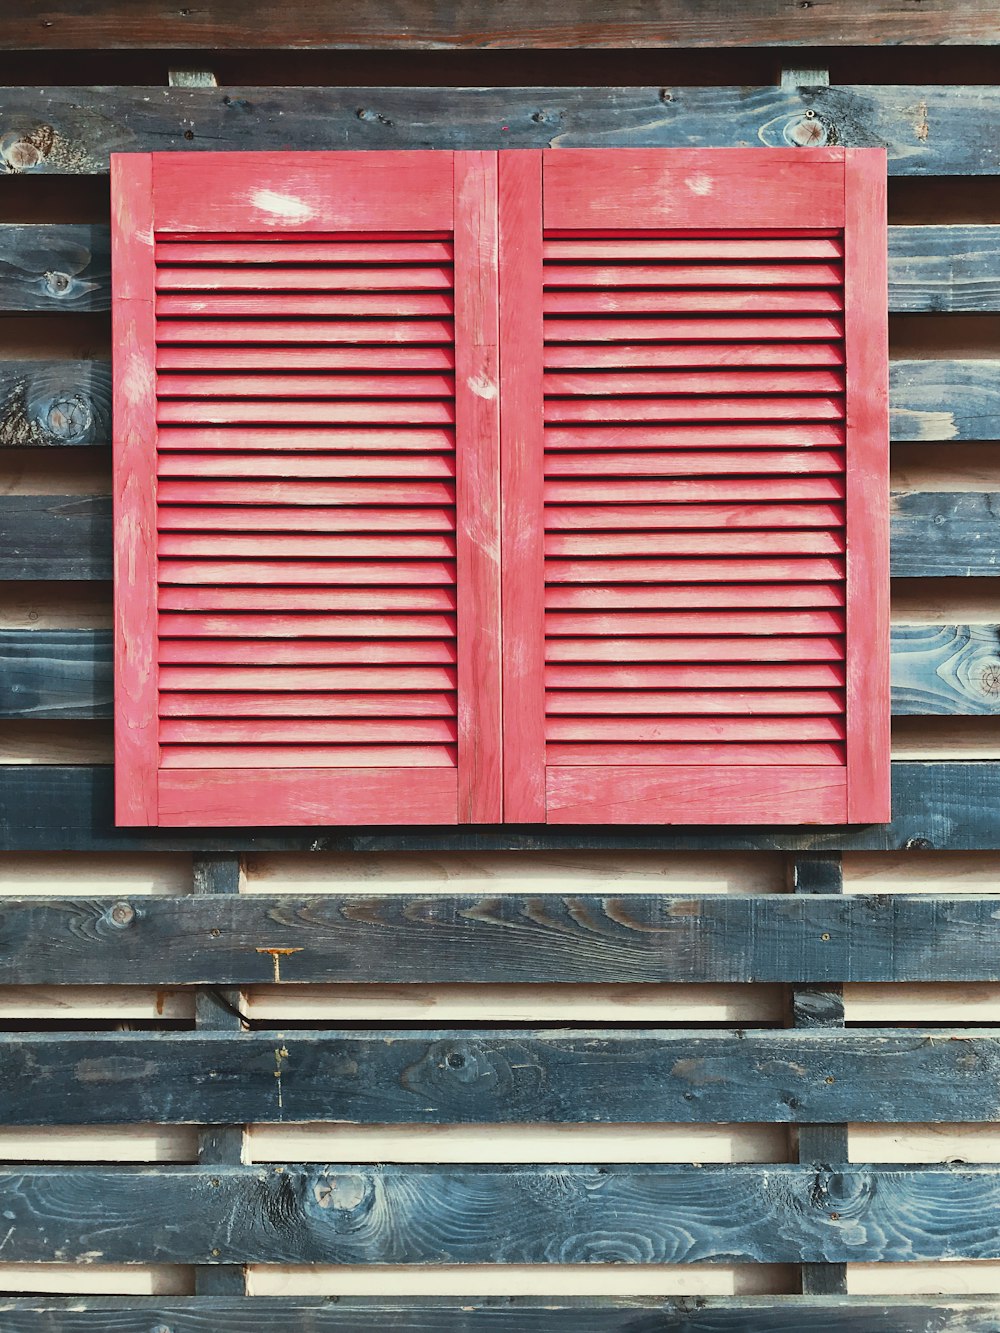 a red shuttered window on a wooden wall